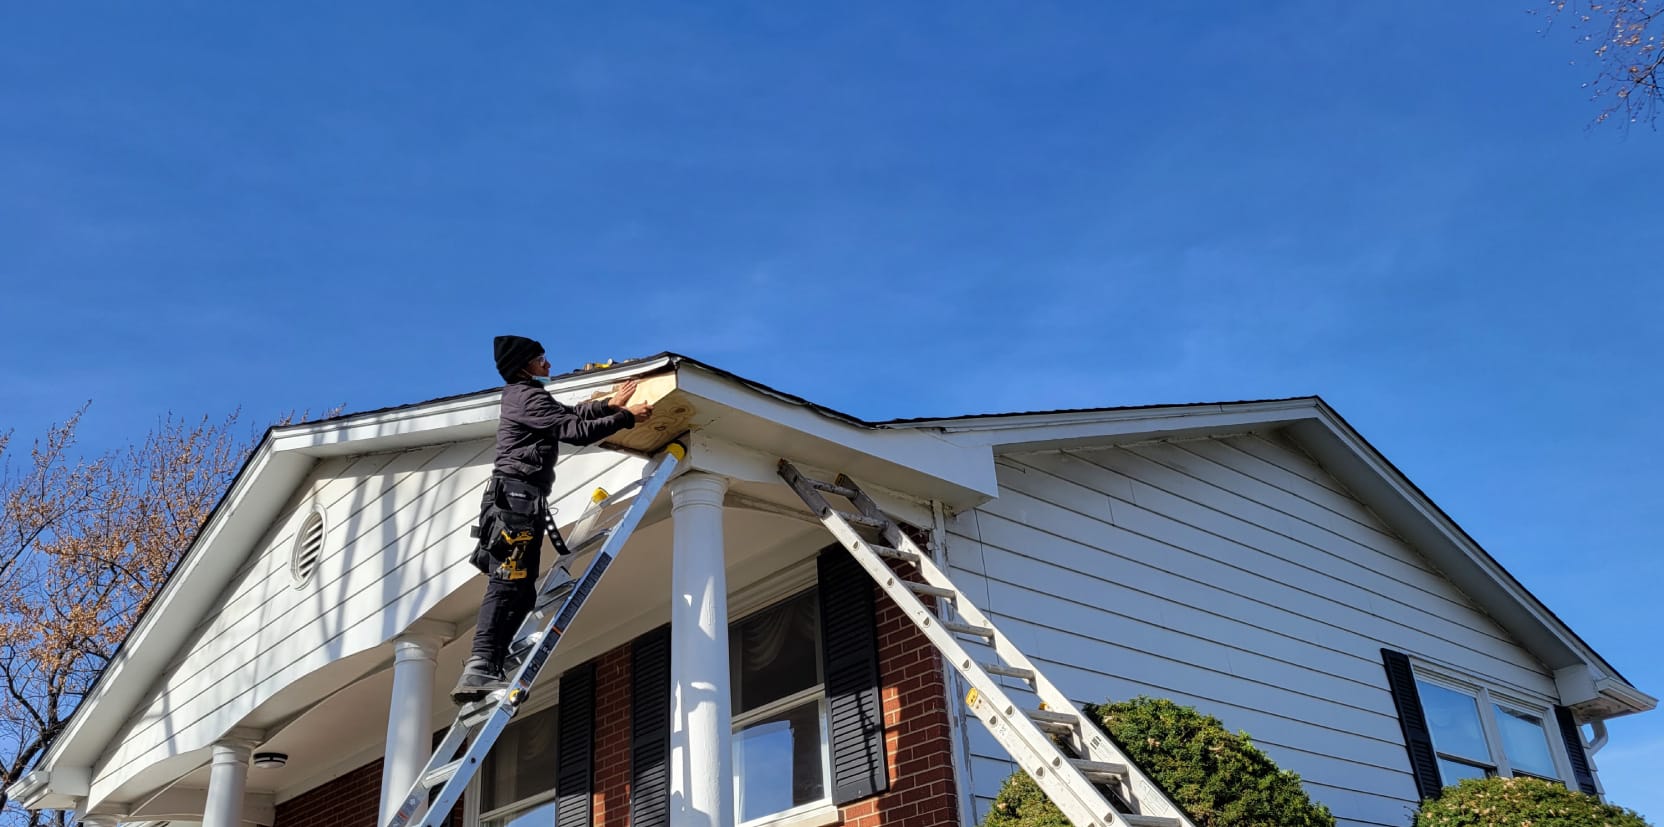 who repair soffit and Fascia - GUTTERS BERWYN ILLINOIS - SOFFIT AND FASCIA SERVICE